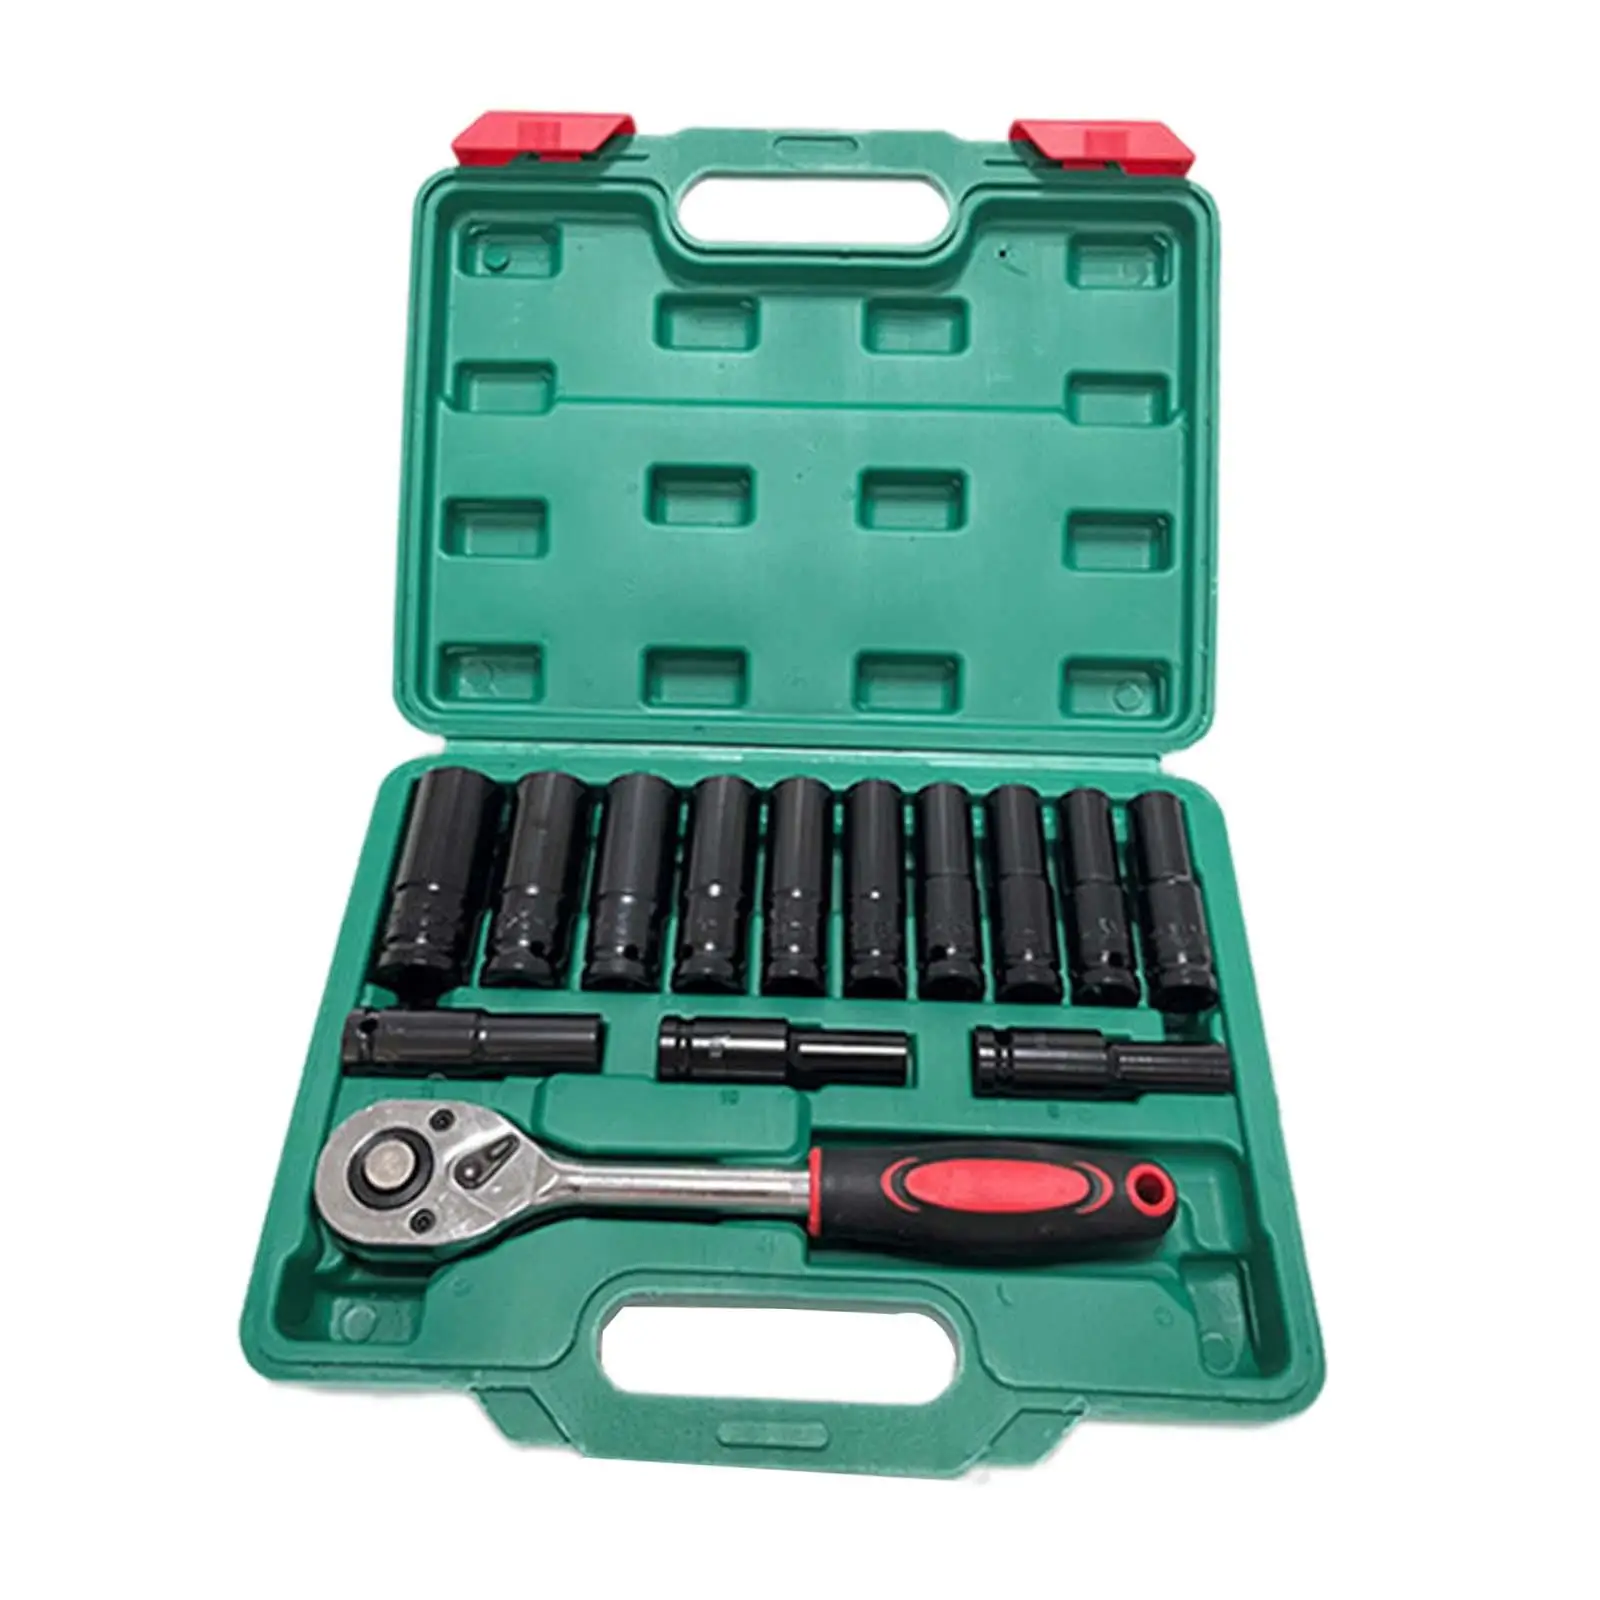 

14Pcs Ratchet Wrench Socket Set 8mm-24mm Easy Installation with Storage Box Steel Professional 1/2 inch Drive Impact Socket Set